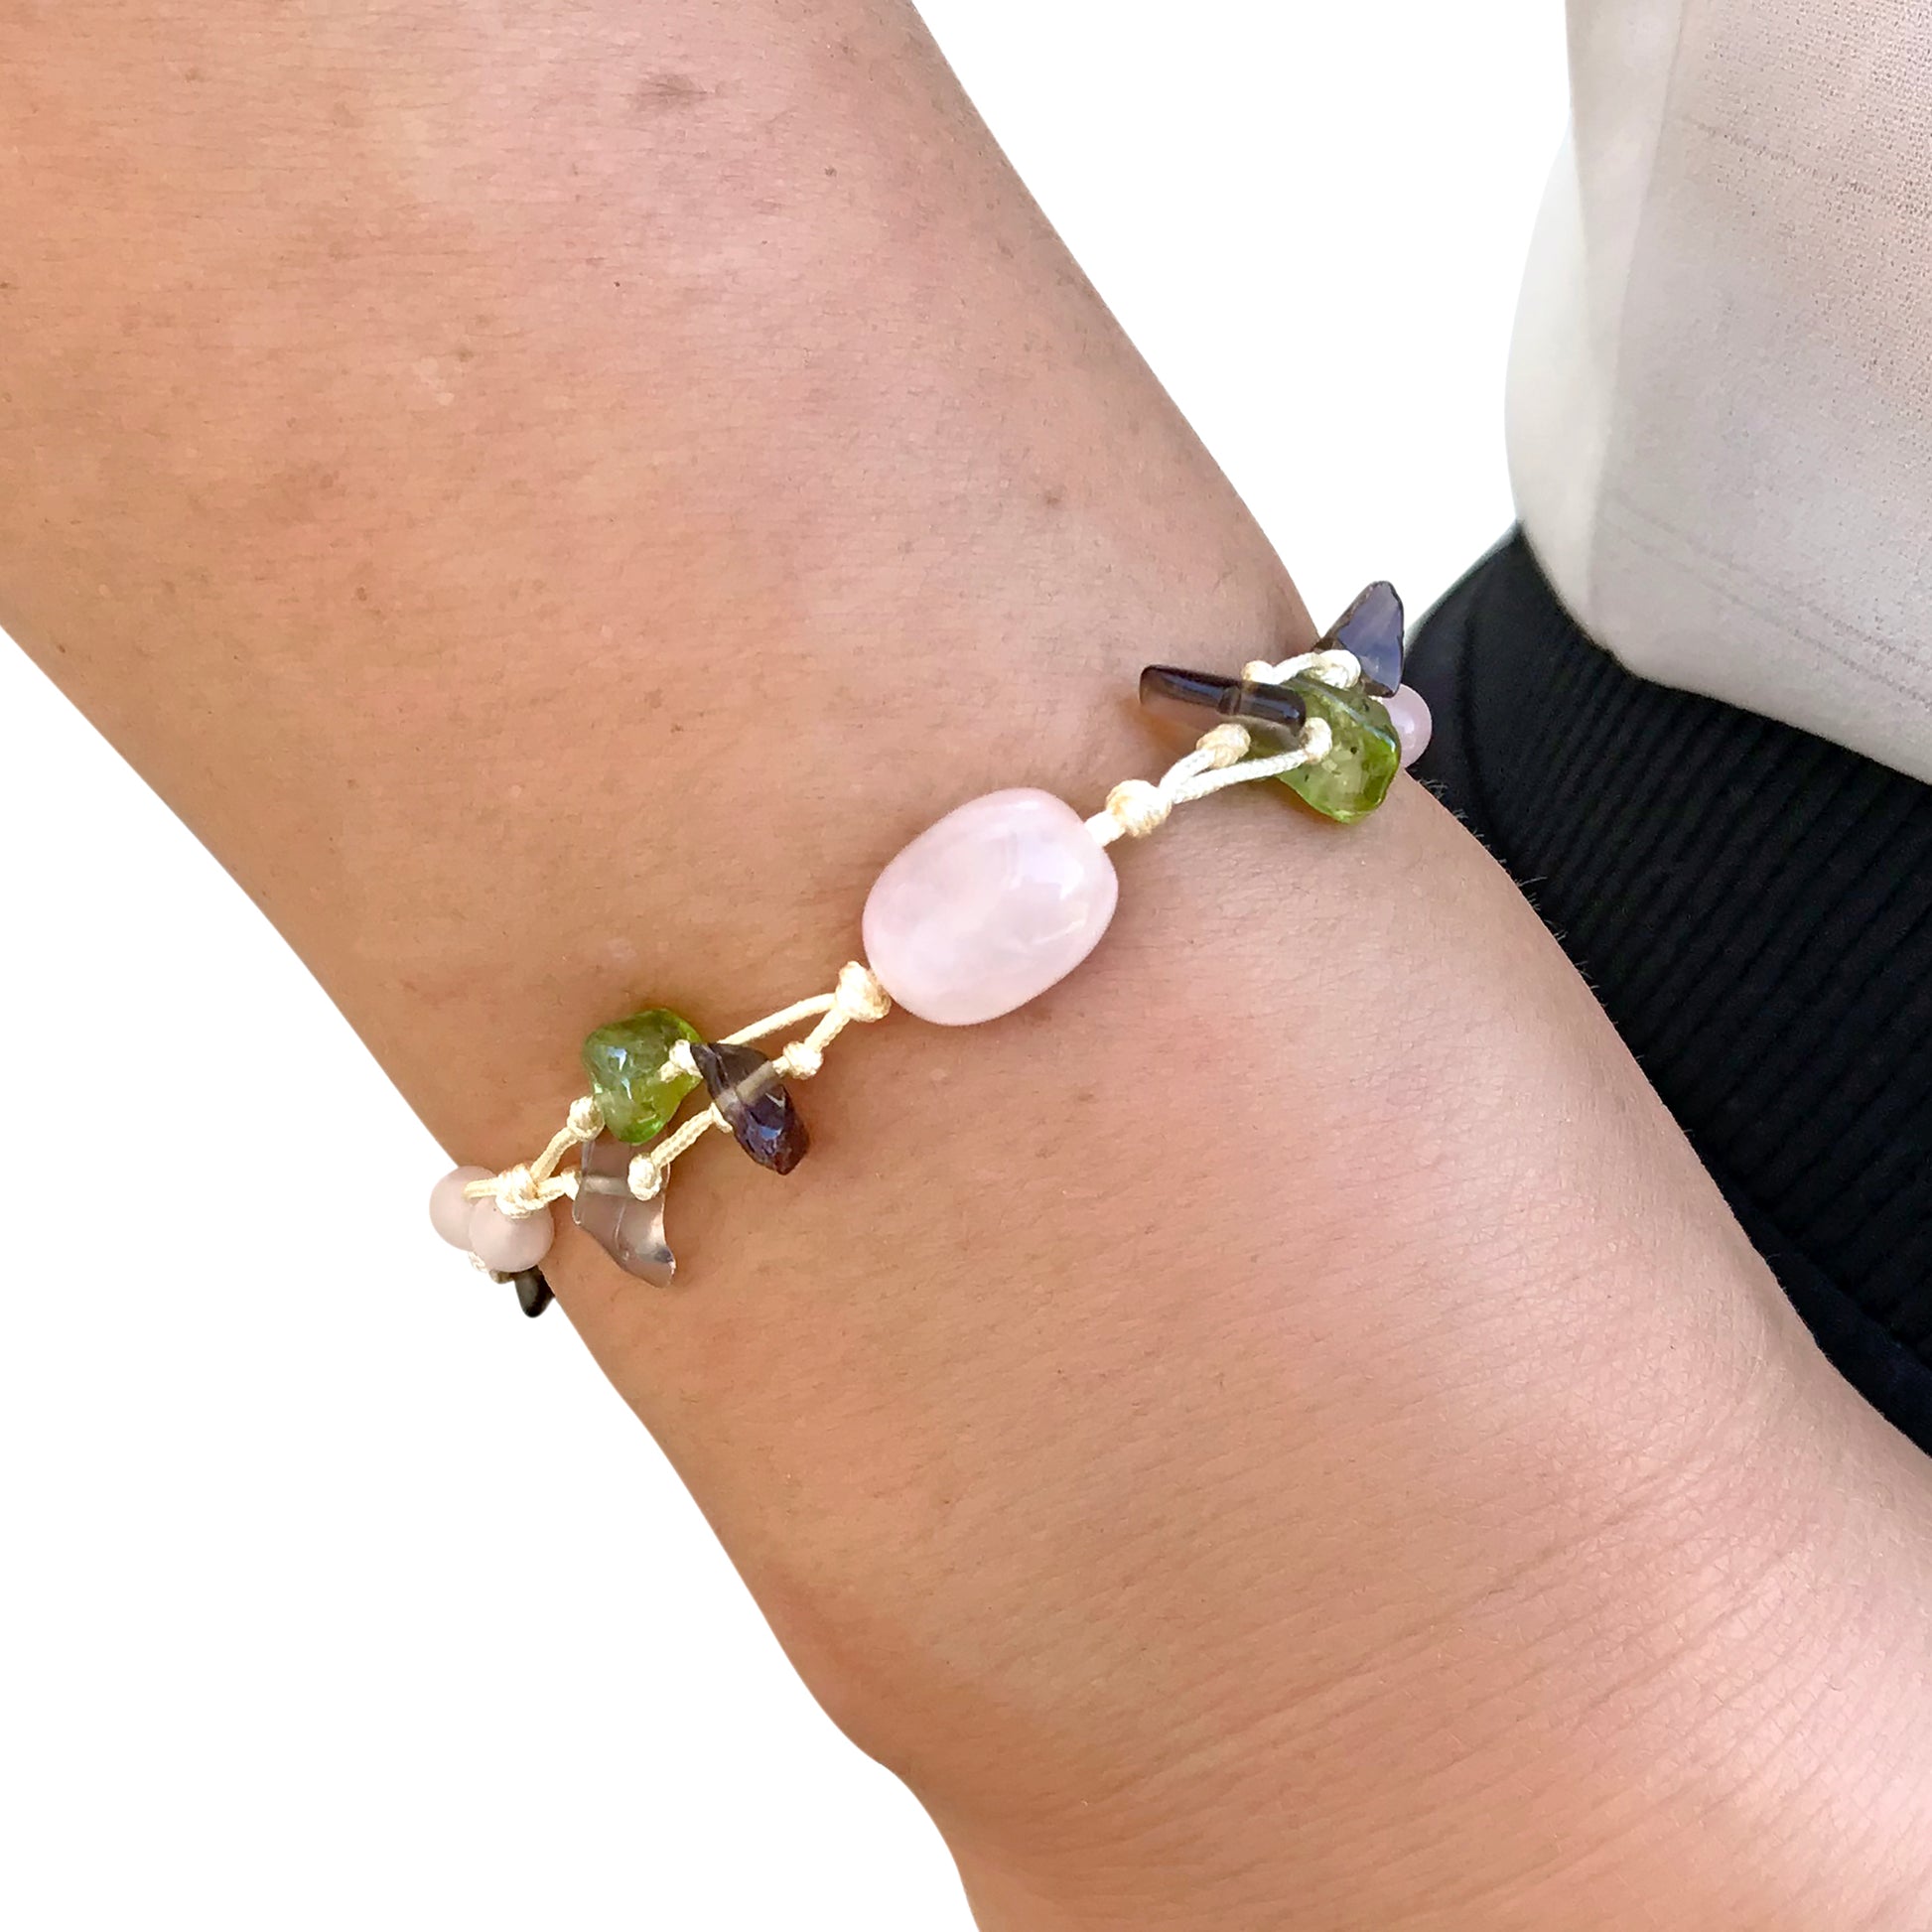 Get Ready for a Splash of Color with Rose Quartz and Gemstones